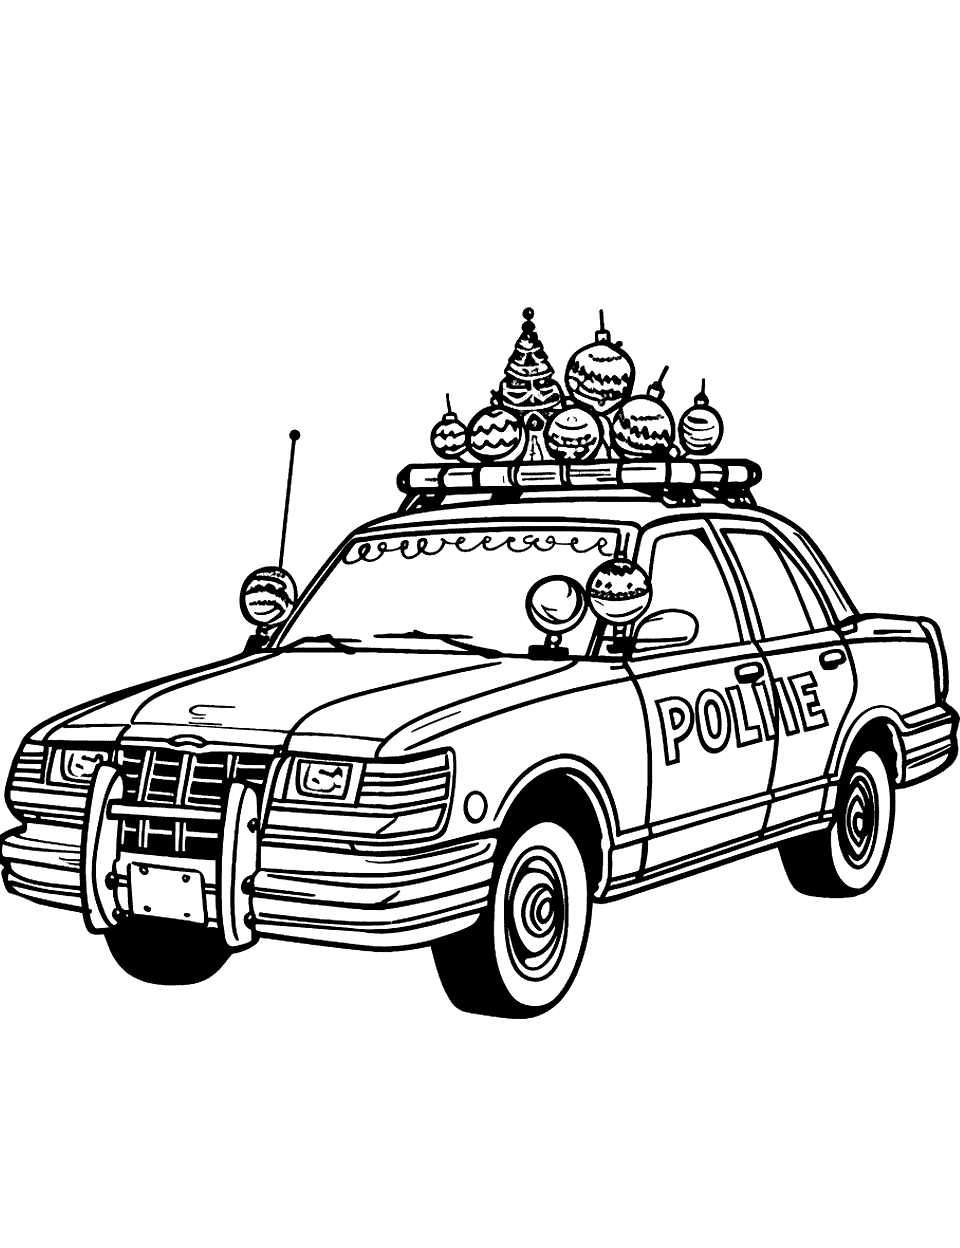 Police Car in a Holiday Coloring Page - A police car decorated with festive lights and ornaments on holiday.